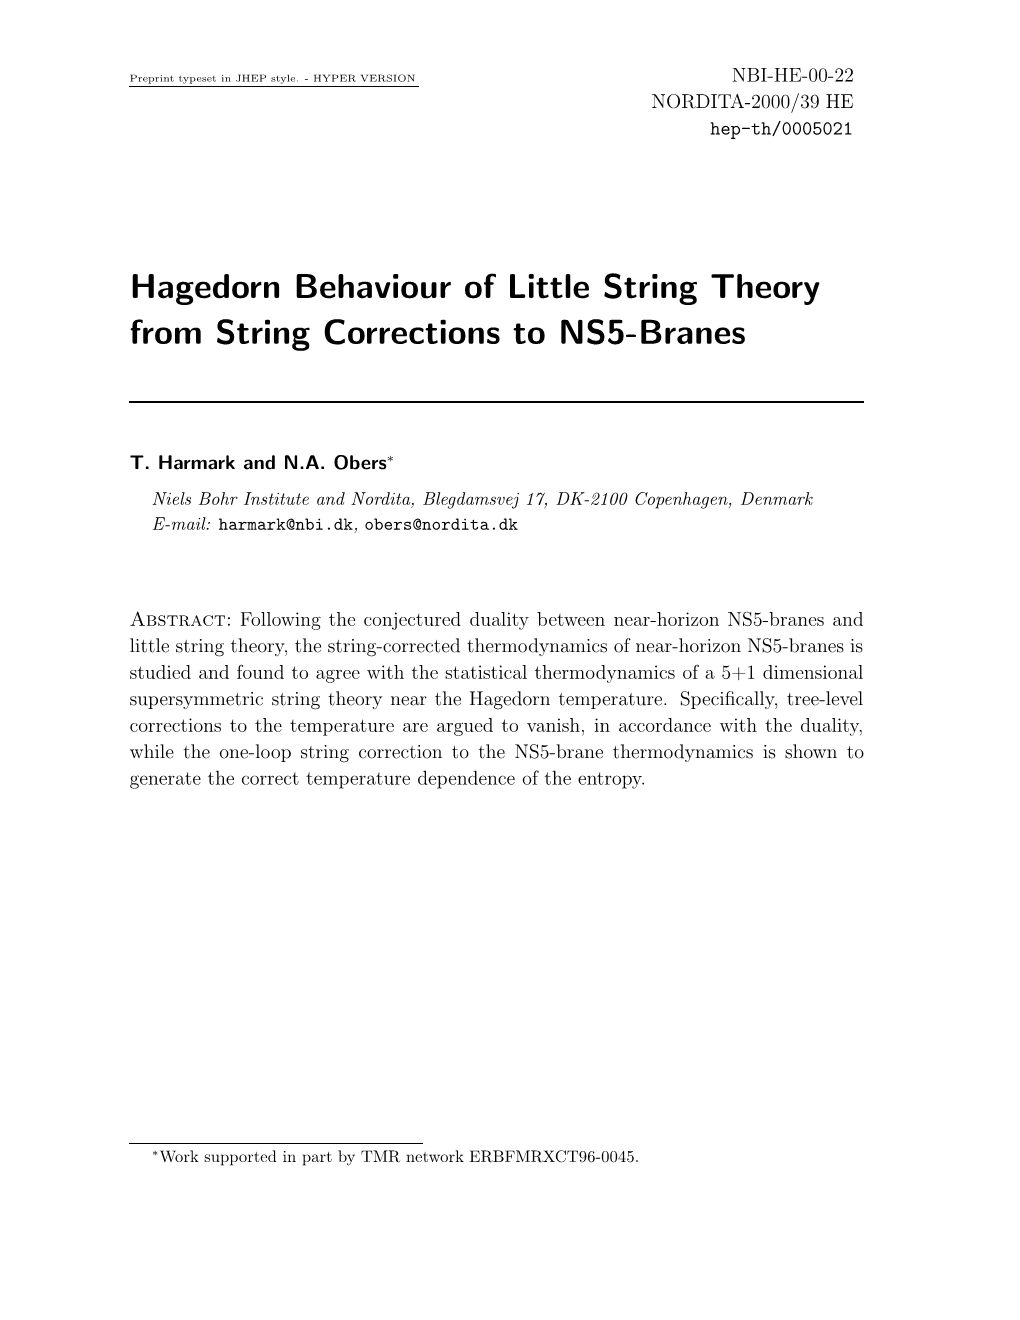 Hagedorn Behaviour of Little String Theory from String Corrections to NS5-Branes